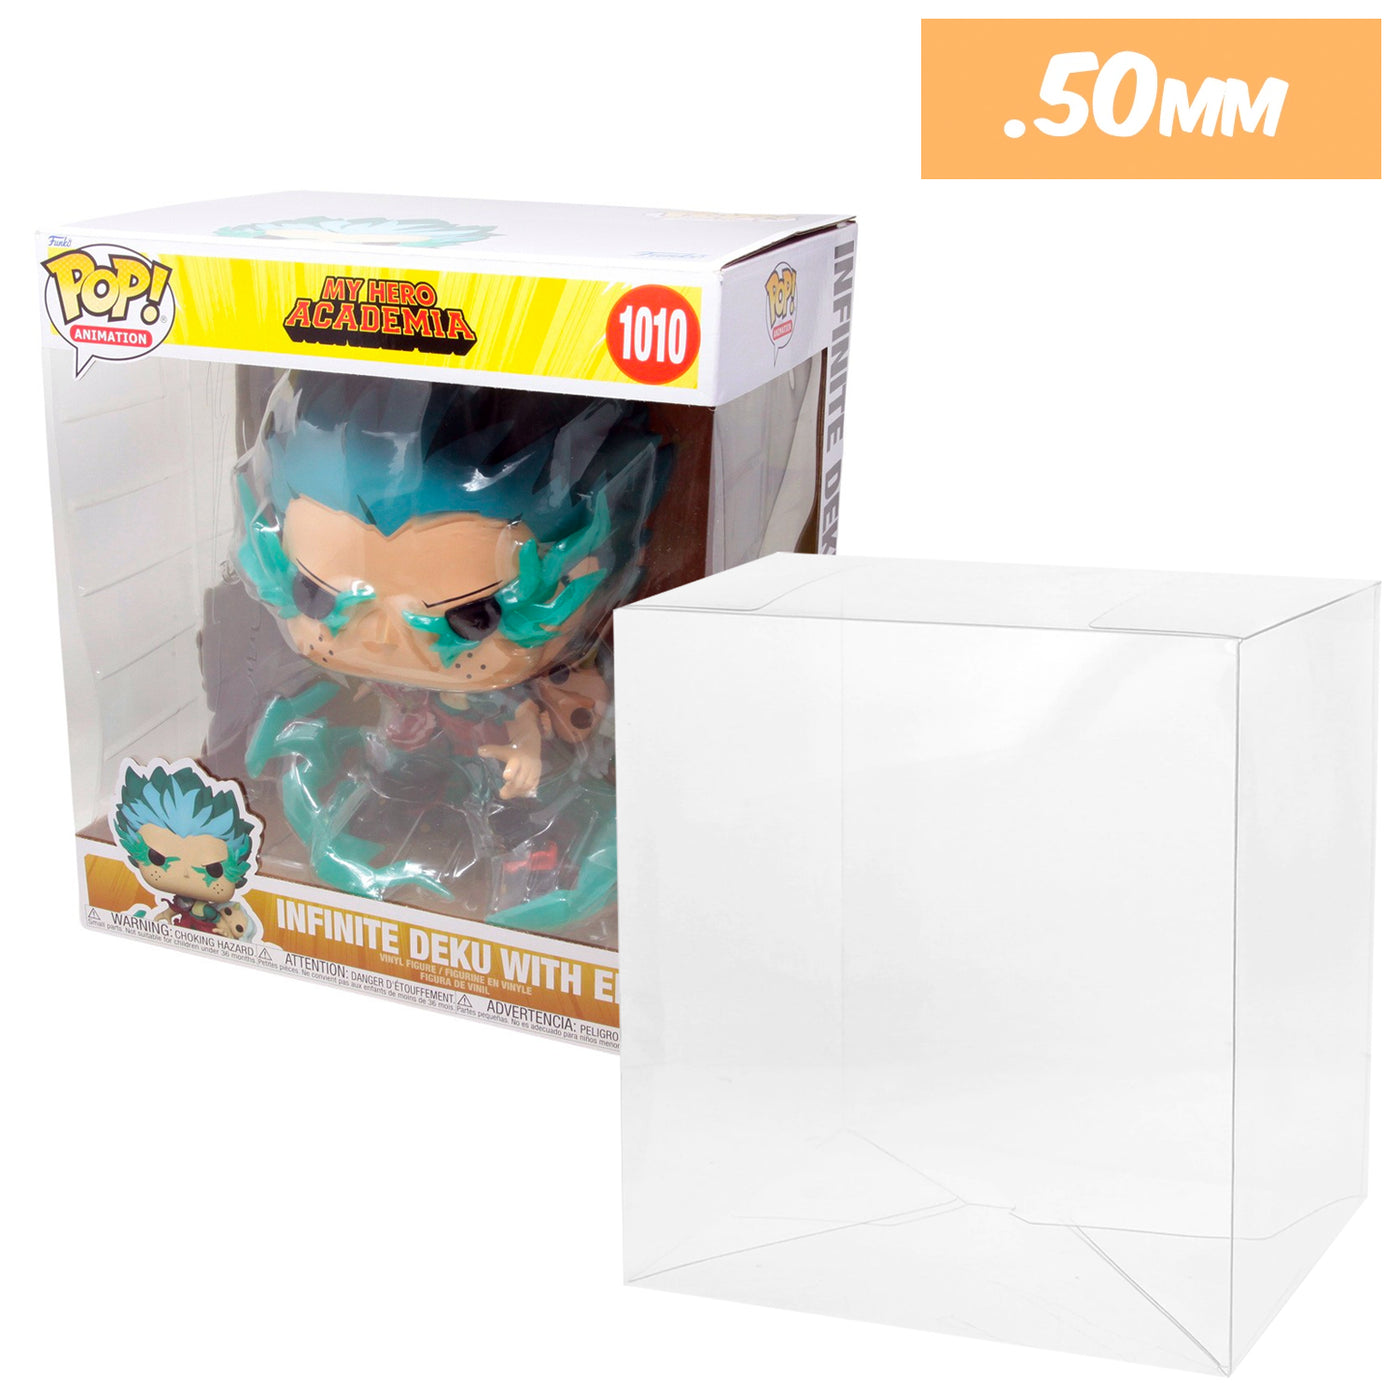 10 inch wide new size infinite deku with eri best funko pop protectors thick strong uv scratch flat top stack vinyl display geek plastic shield vaulted eco armor fits collect protect display case kollector